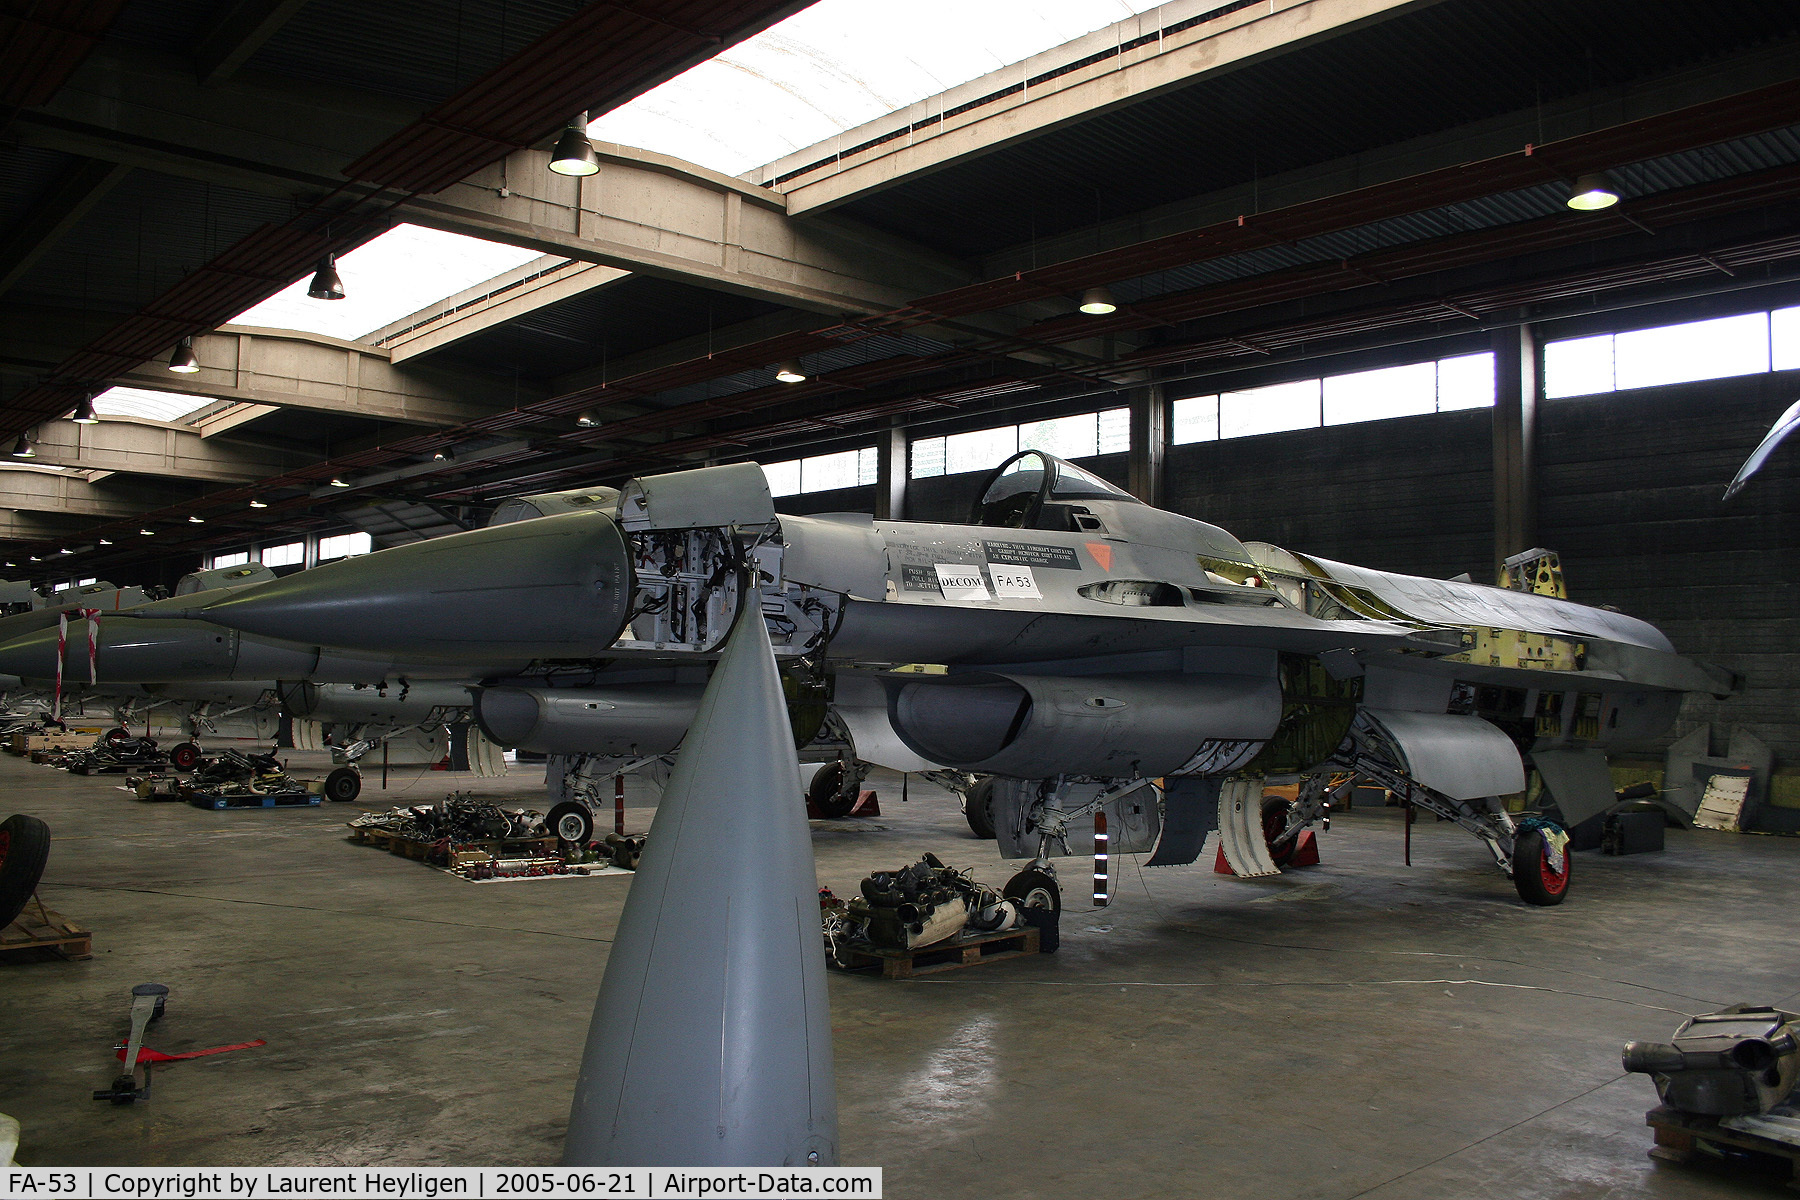 FA-53, 1982 SABCA F-16AM Fighting Falcon C/N 6H-53, Being dismantled at Rocourt, Belgium